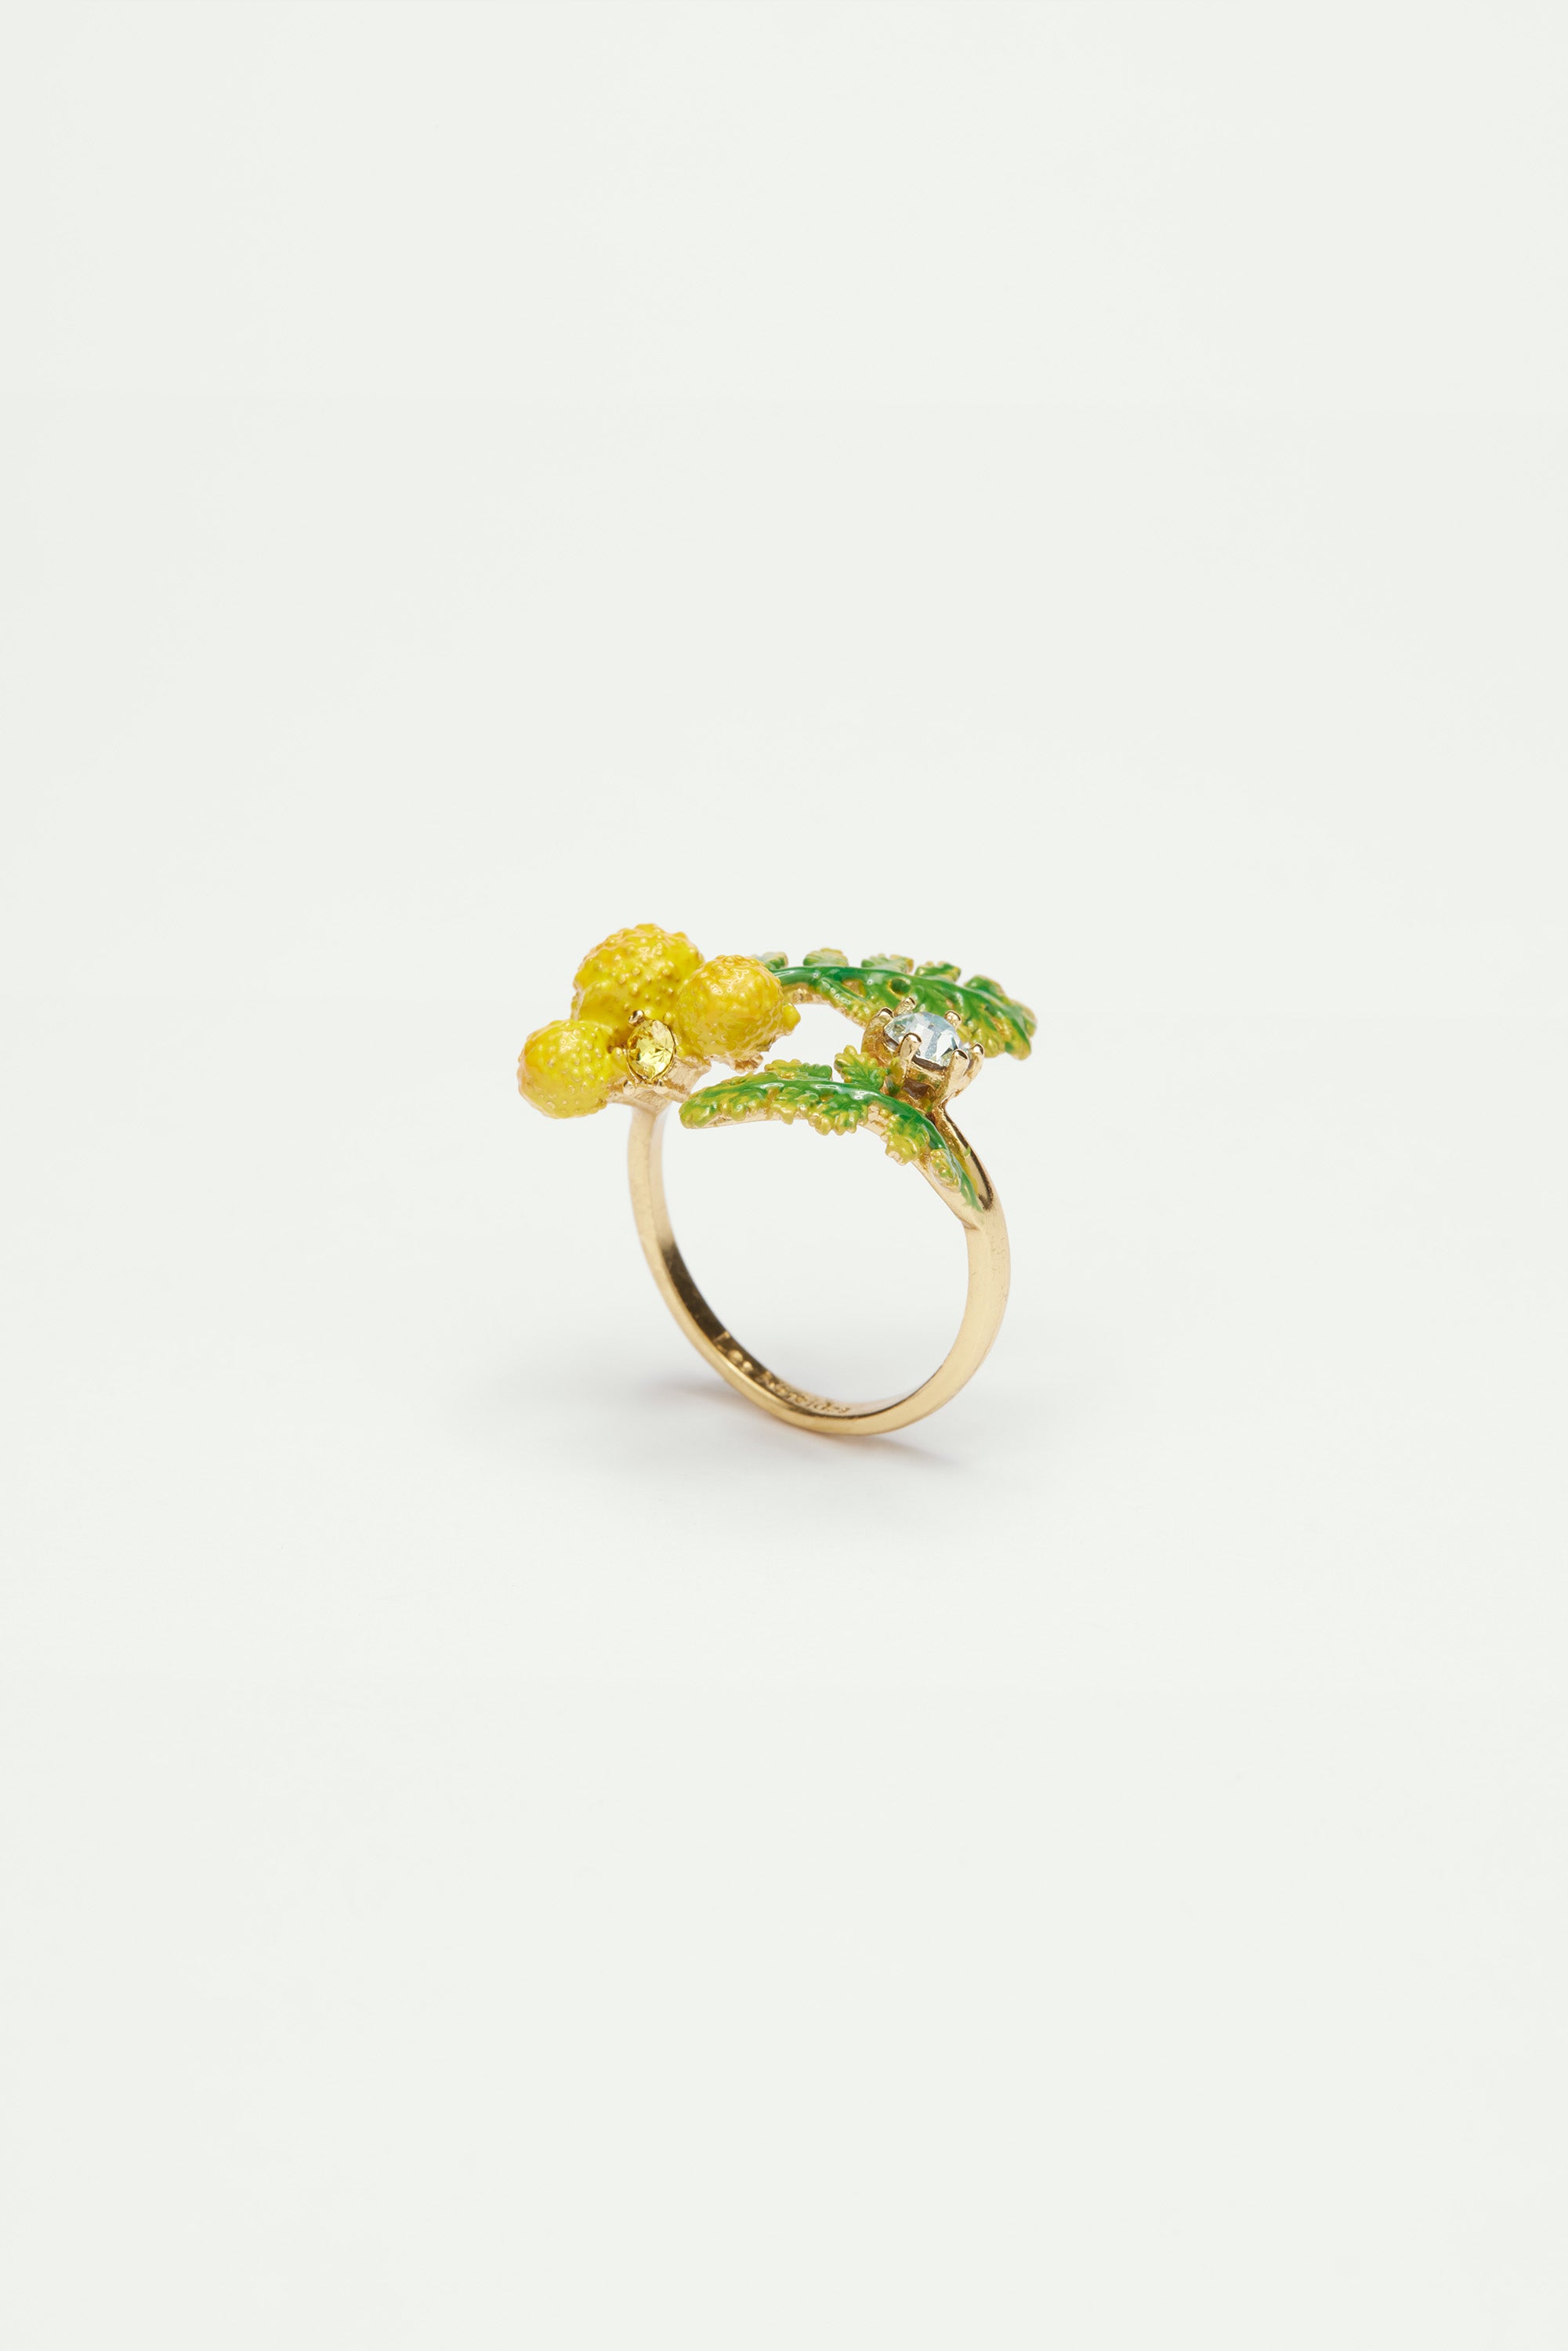 Ferns and mimosa flower adjustable ring